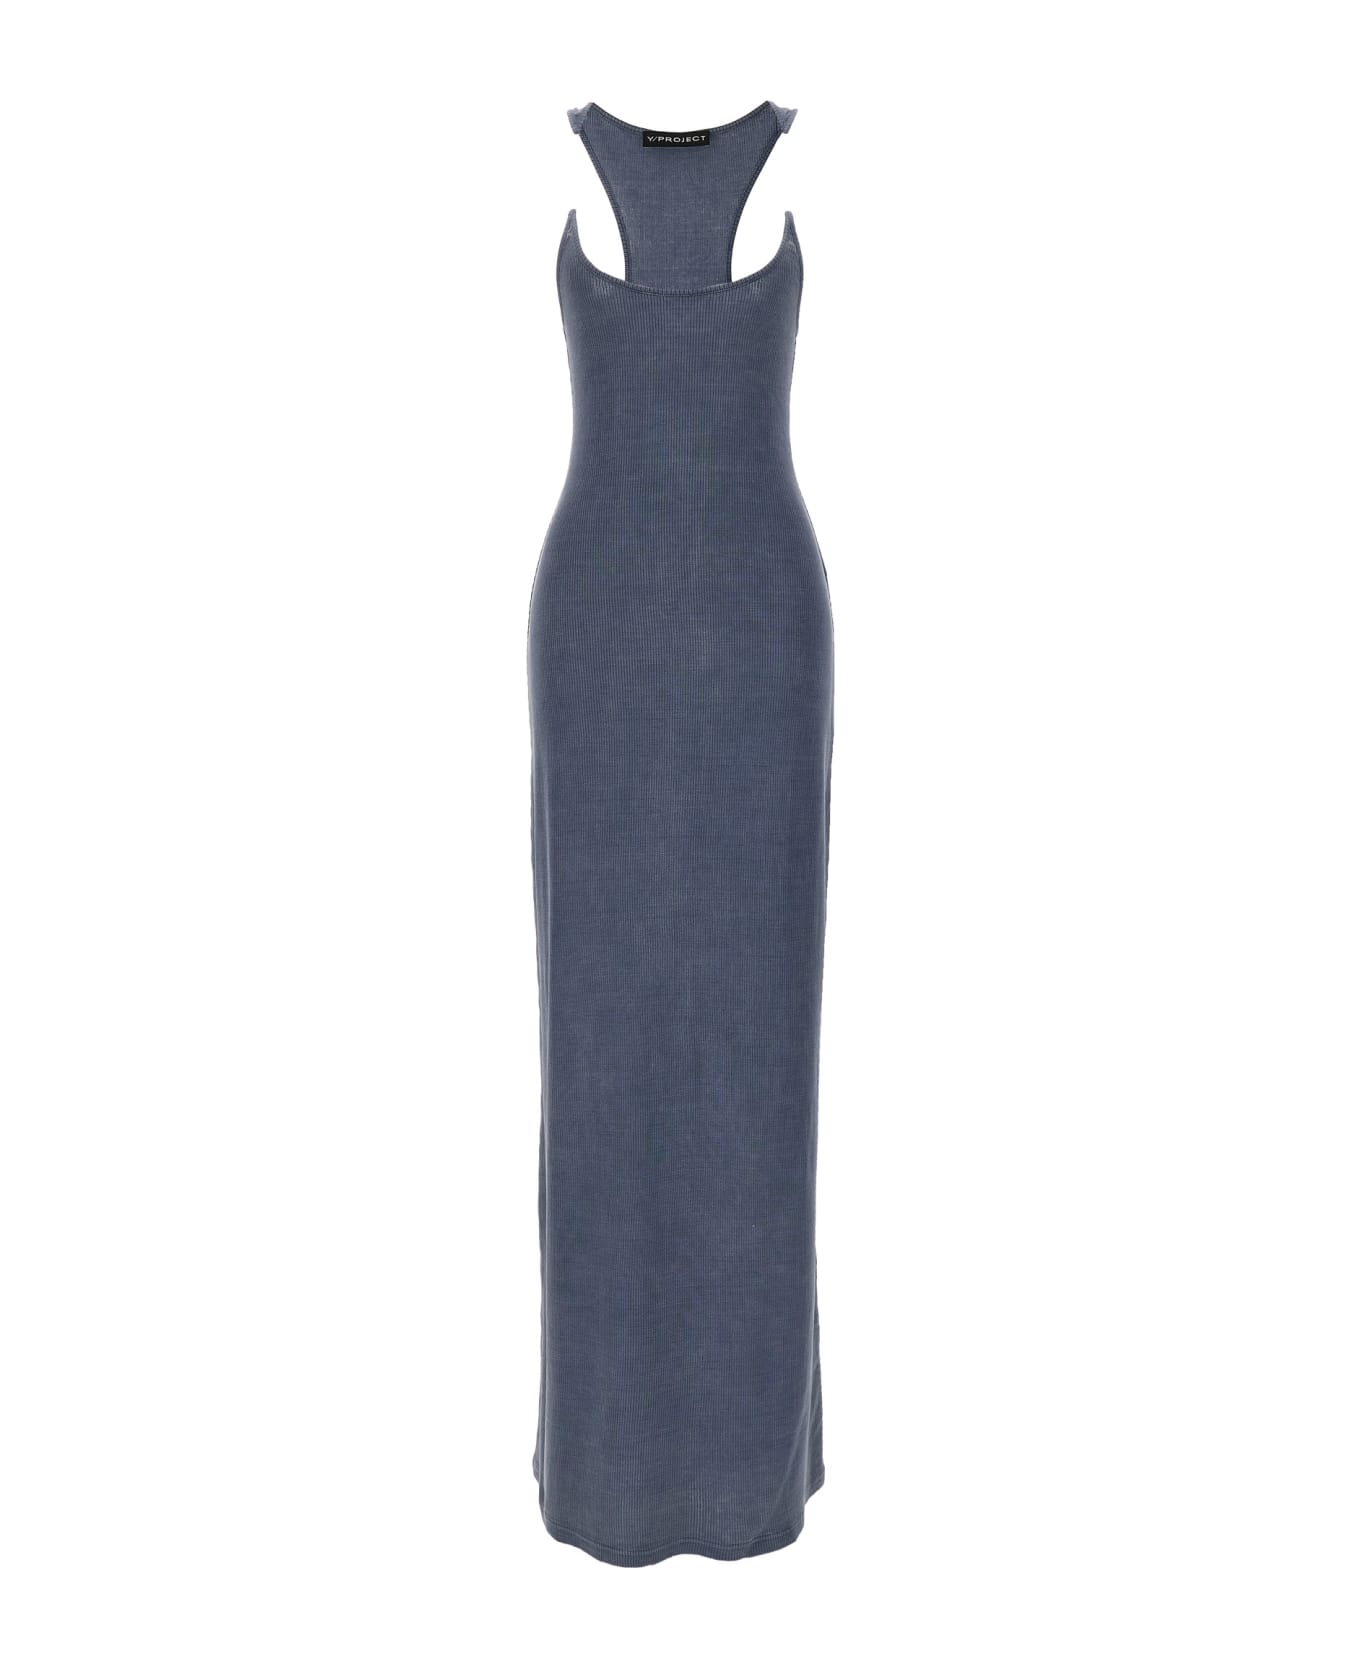 Y/Project 'invisible Strap' Dress - BLUE ACID WASH